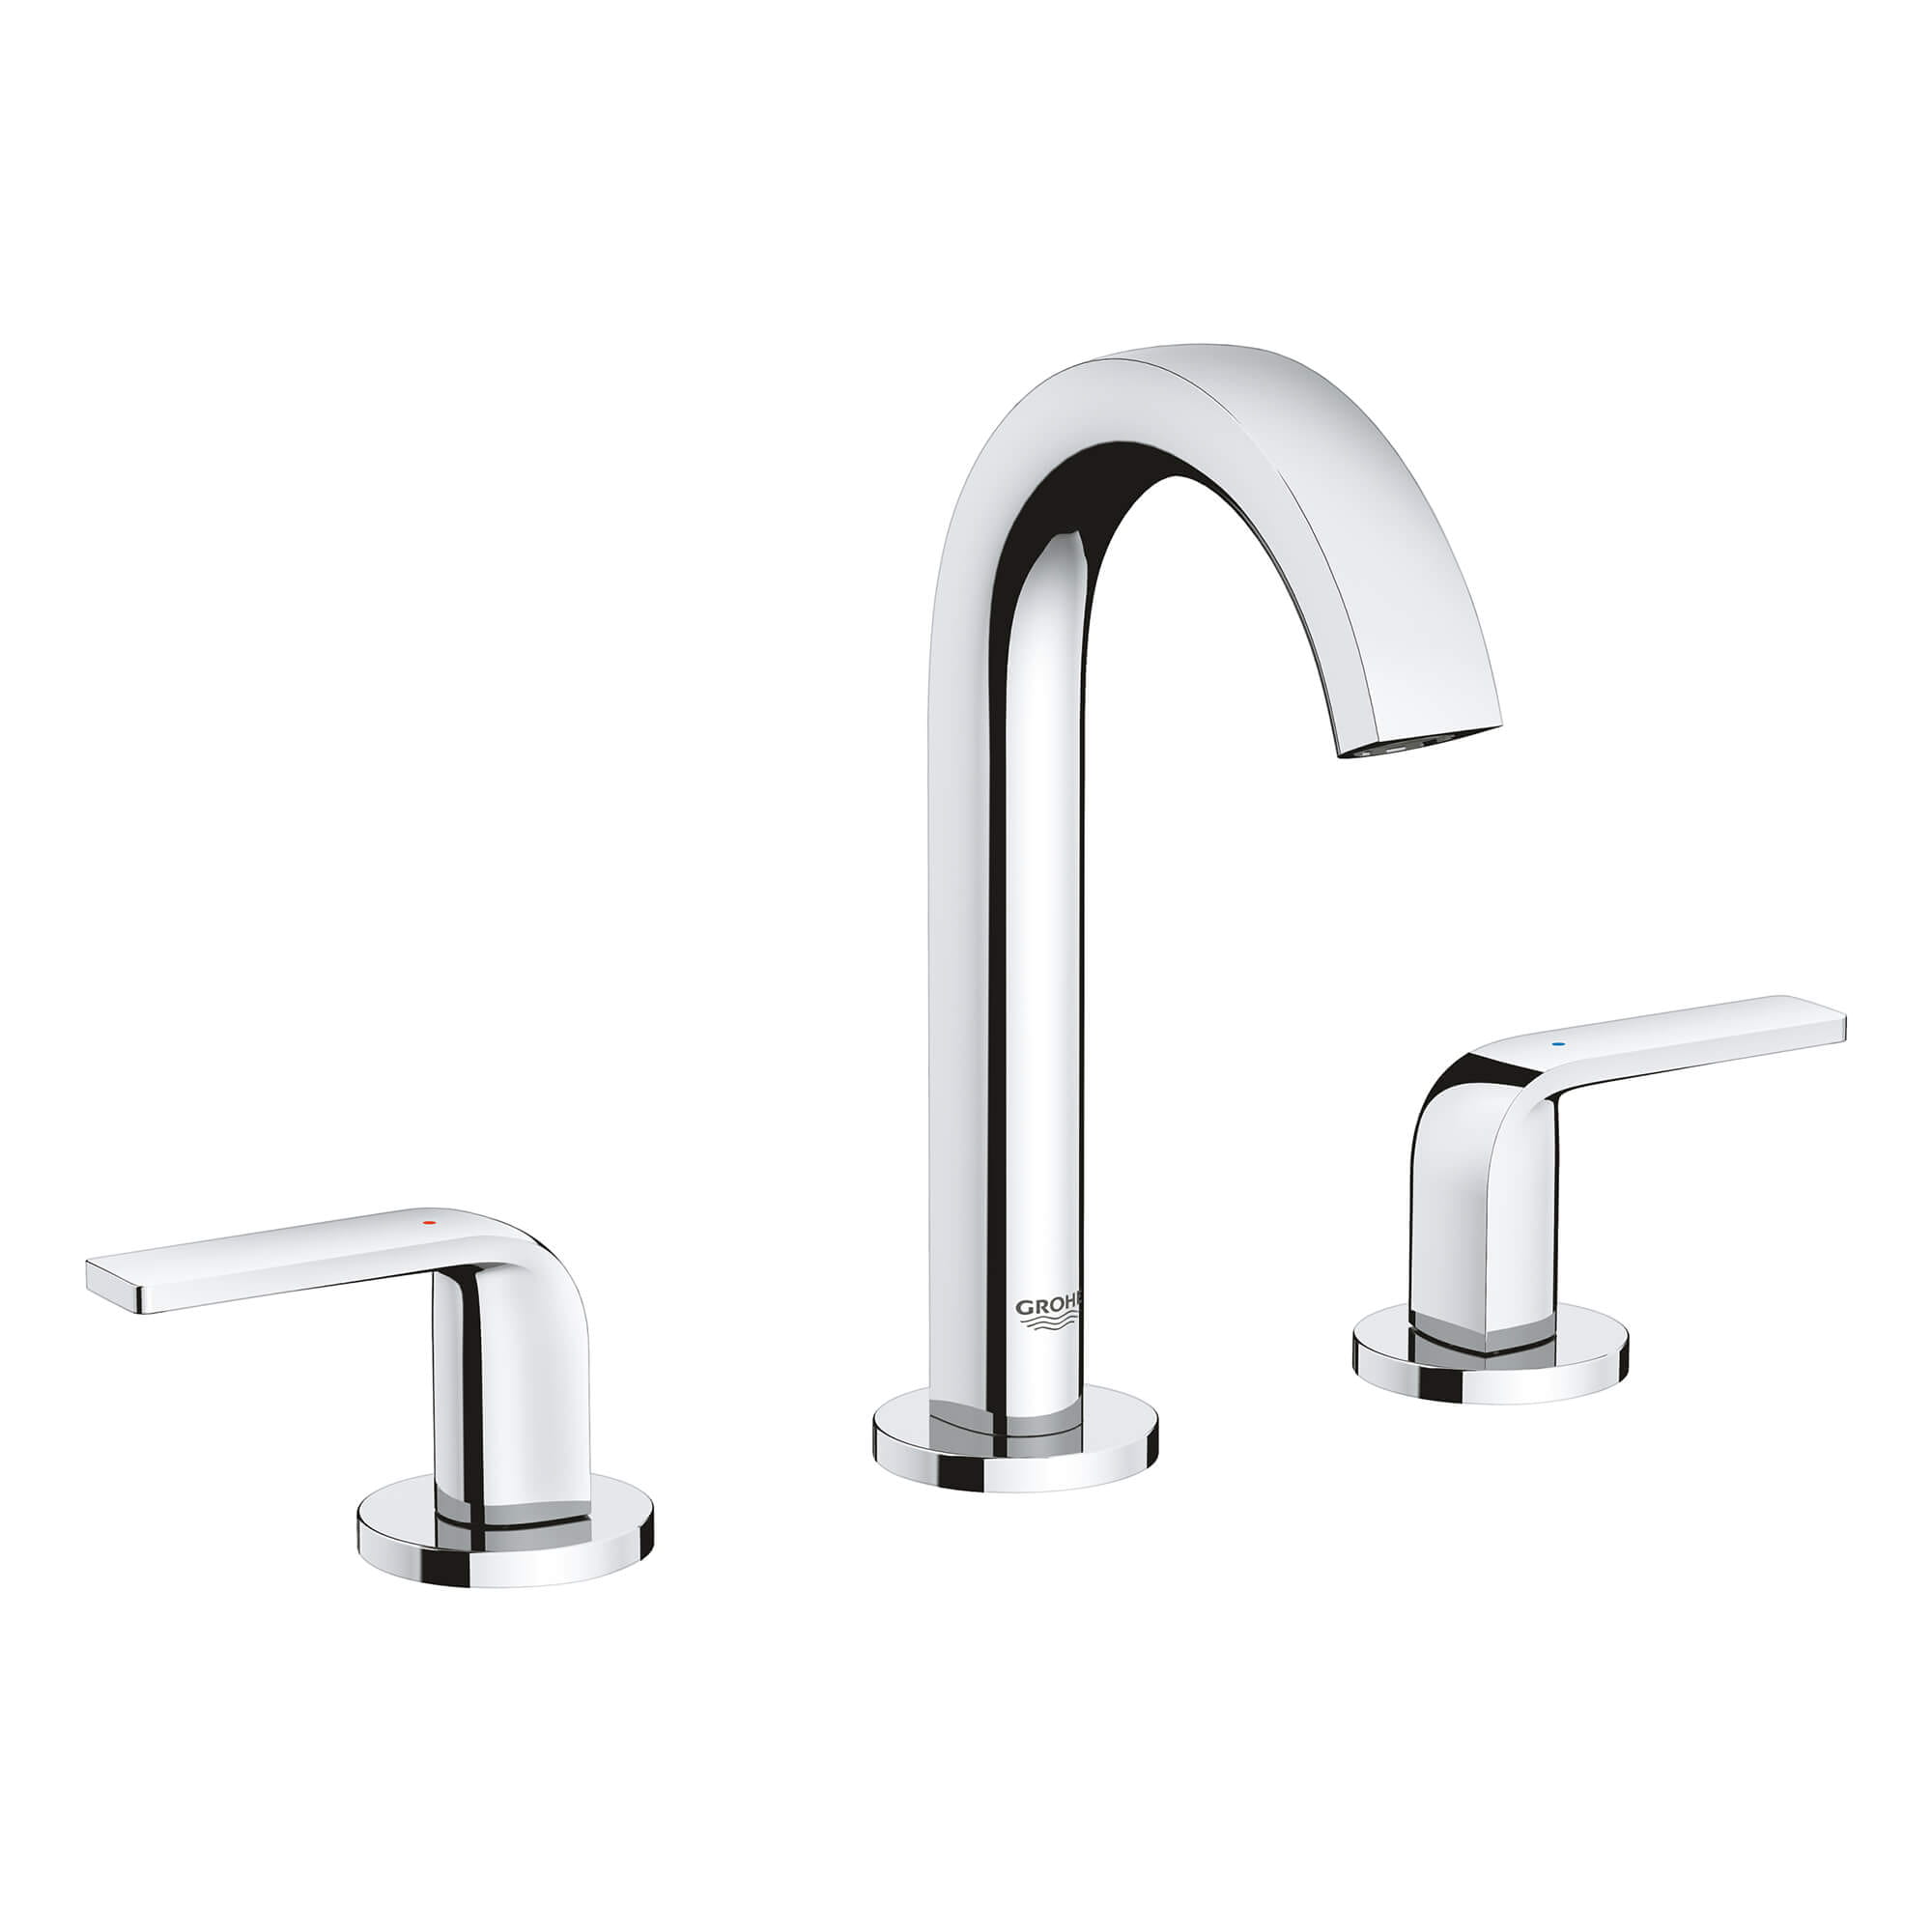 8-INCH WIDESPREAD 2-HANDLE M-SIZE BATHROOM FAUCET 1.2 GPM-related